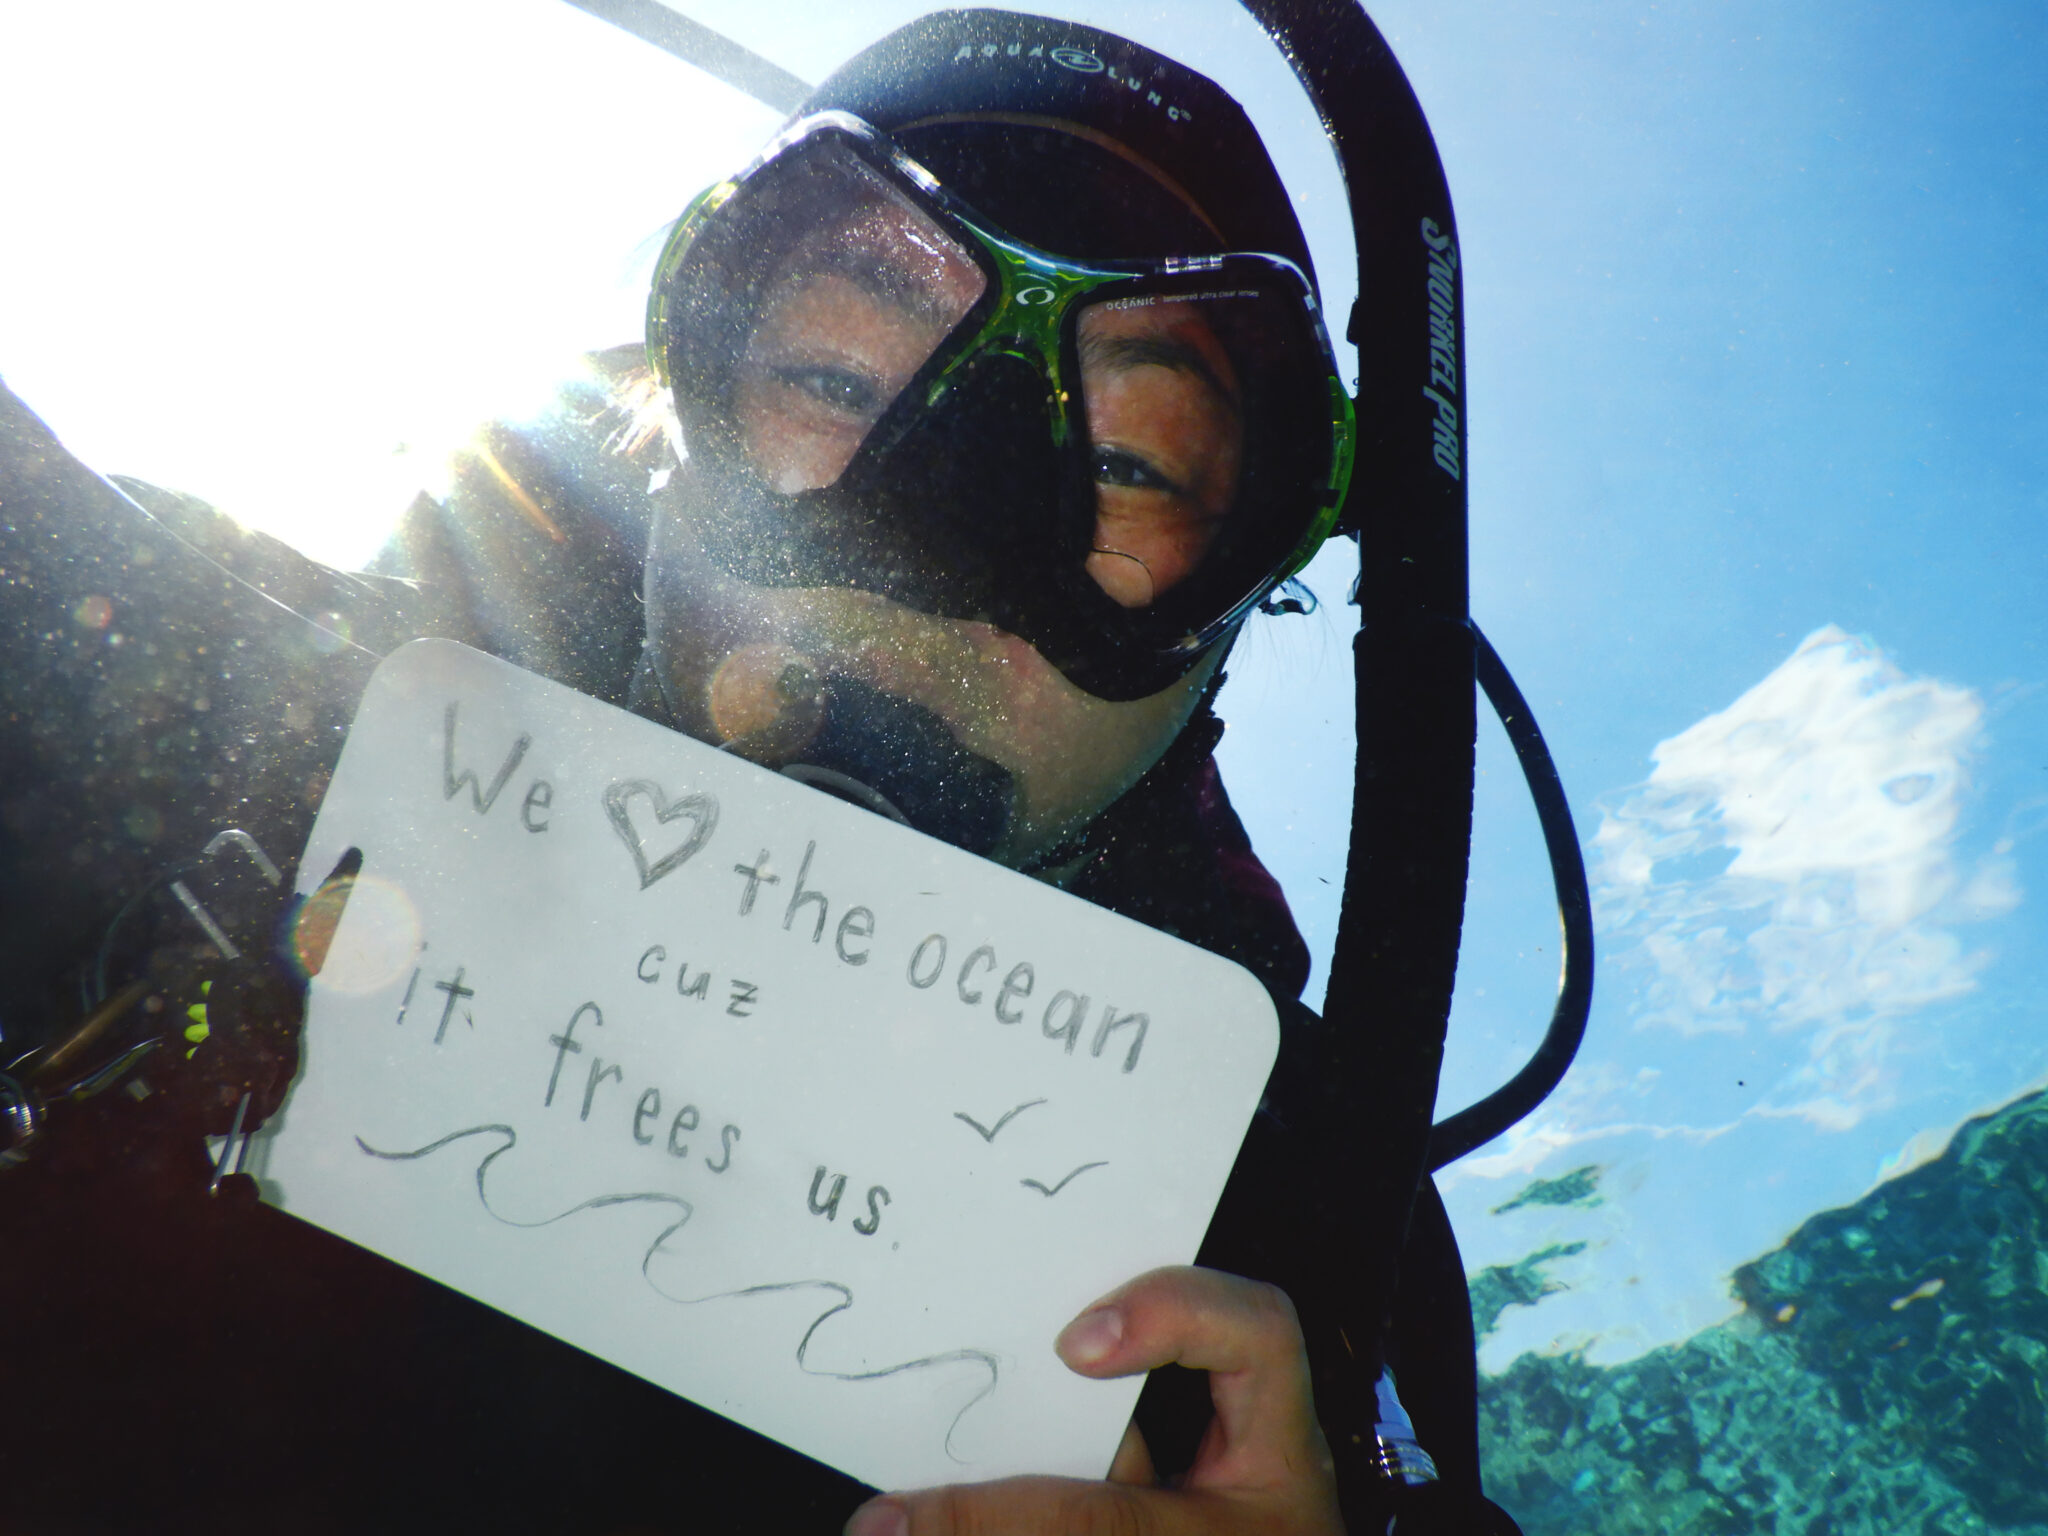 Diver holding a sign that says "We